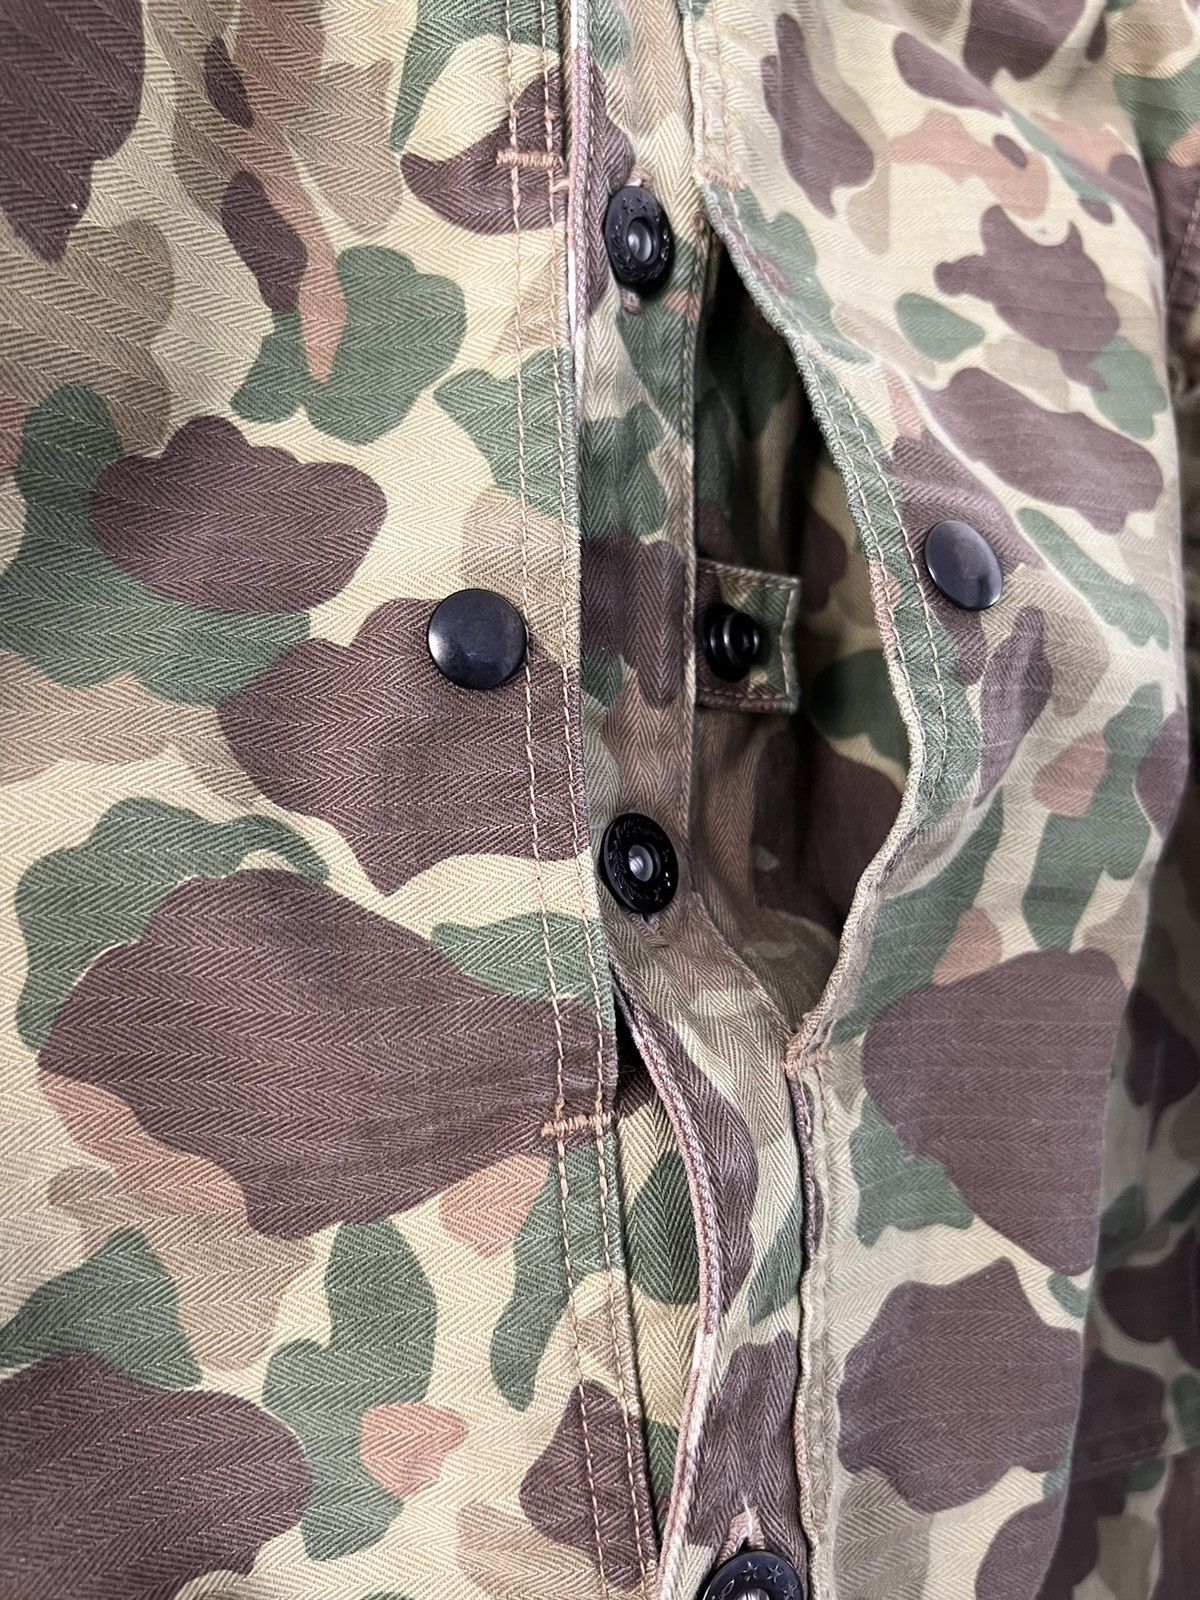 The Real McCoy's The REAL McCOY’s P1944 Frogskin Camo Jacket Size US M / EU 48-50 / 2 - 2 Preview